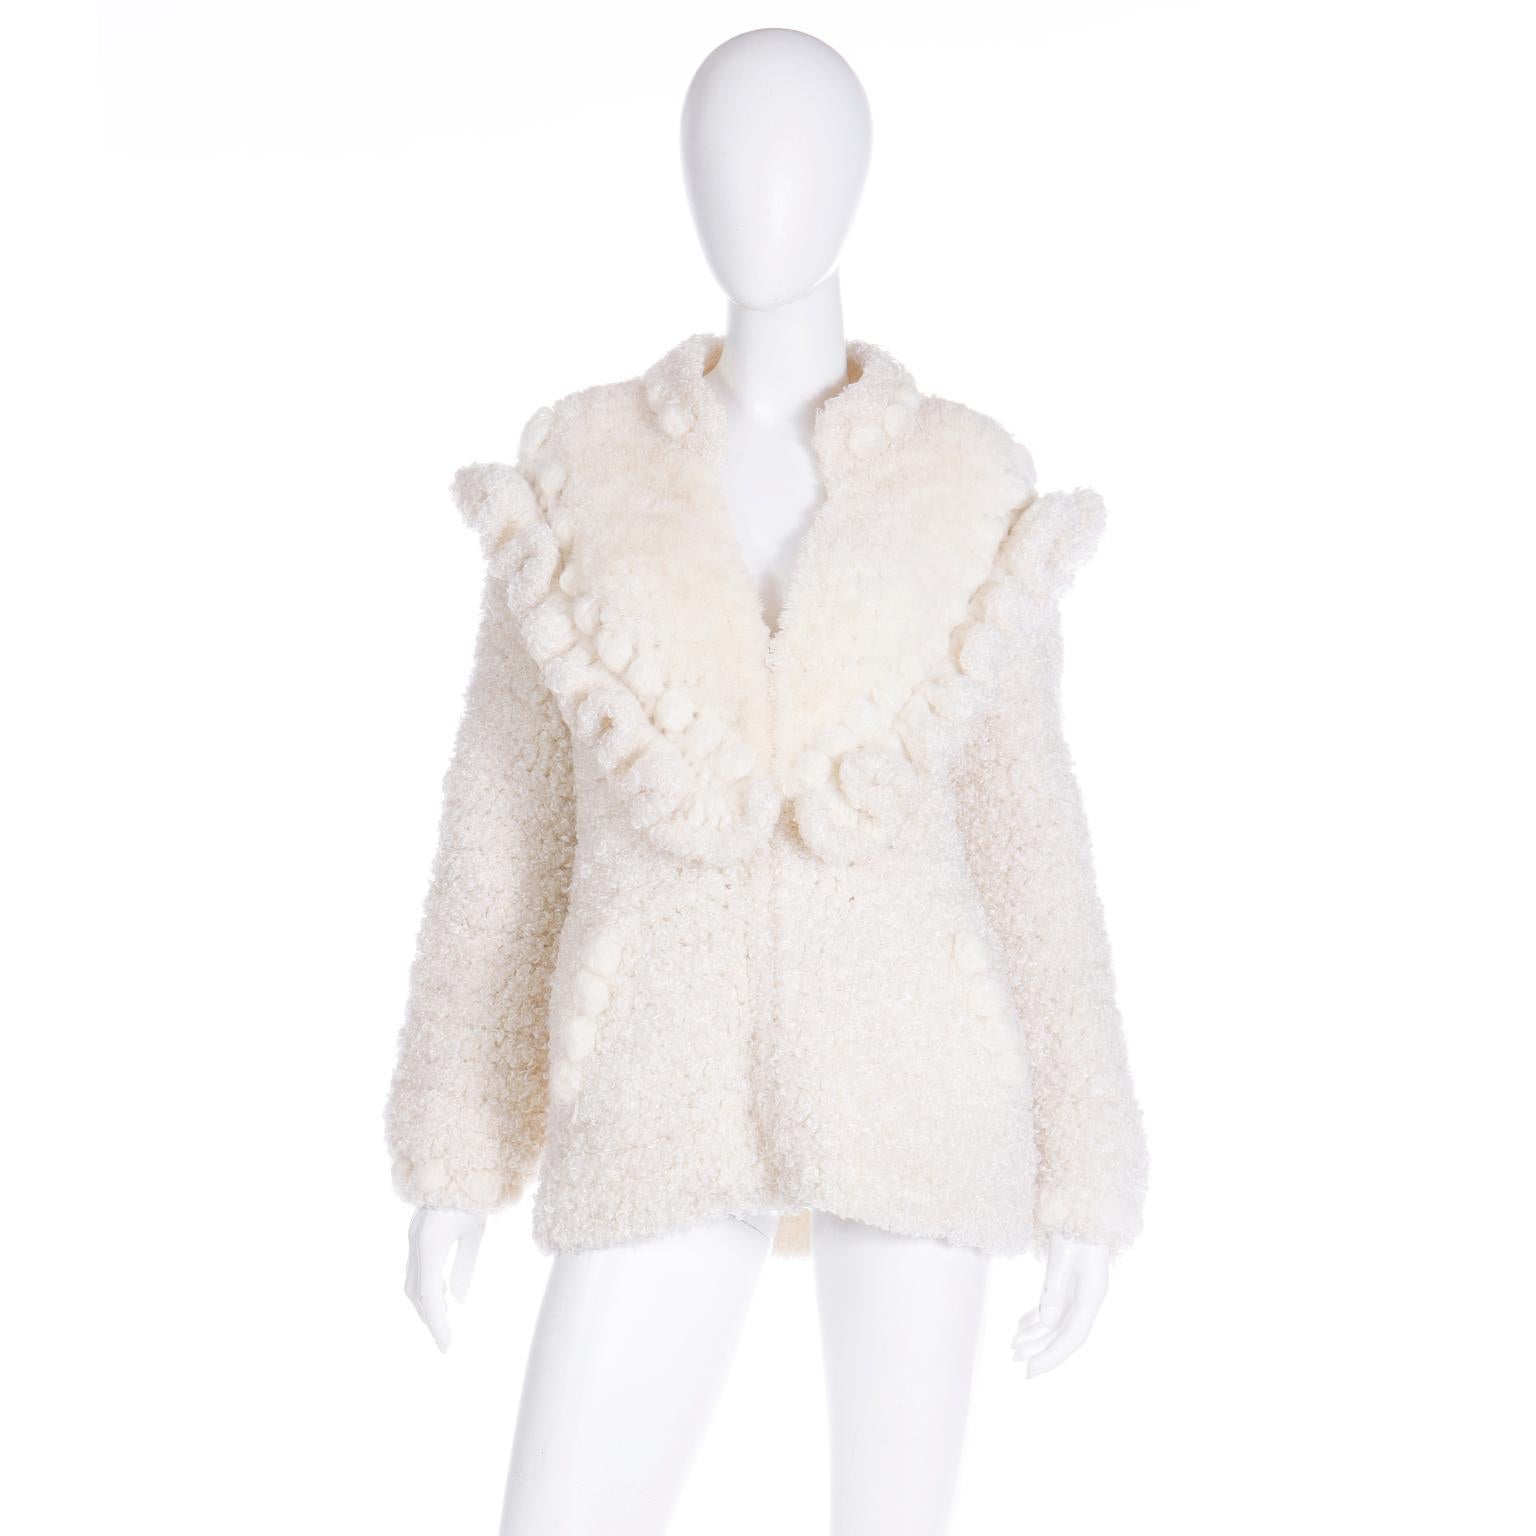 We love vintage sweaters and this fabulous vintage Norma of Canada chunky knit cream sweater is so unique and interesting! The sweater has various knit textures and weaves which creates an incredible amount of dimension and style. The sweater zips